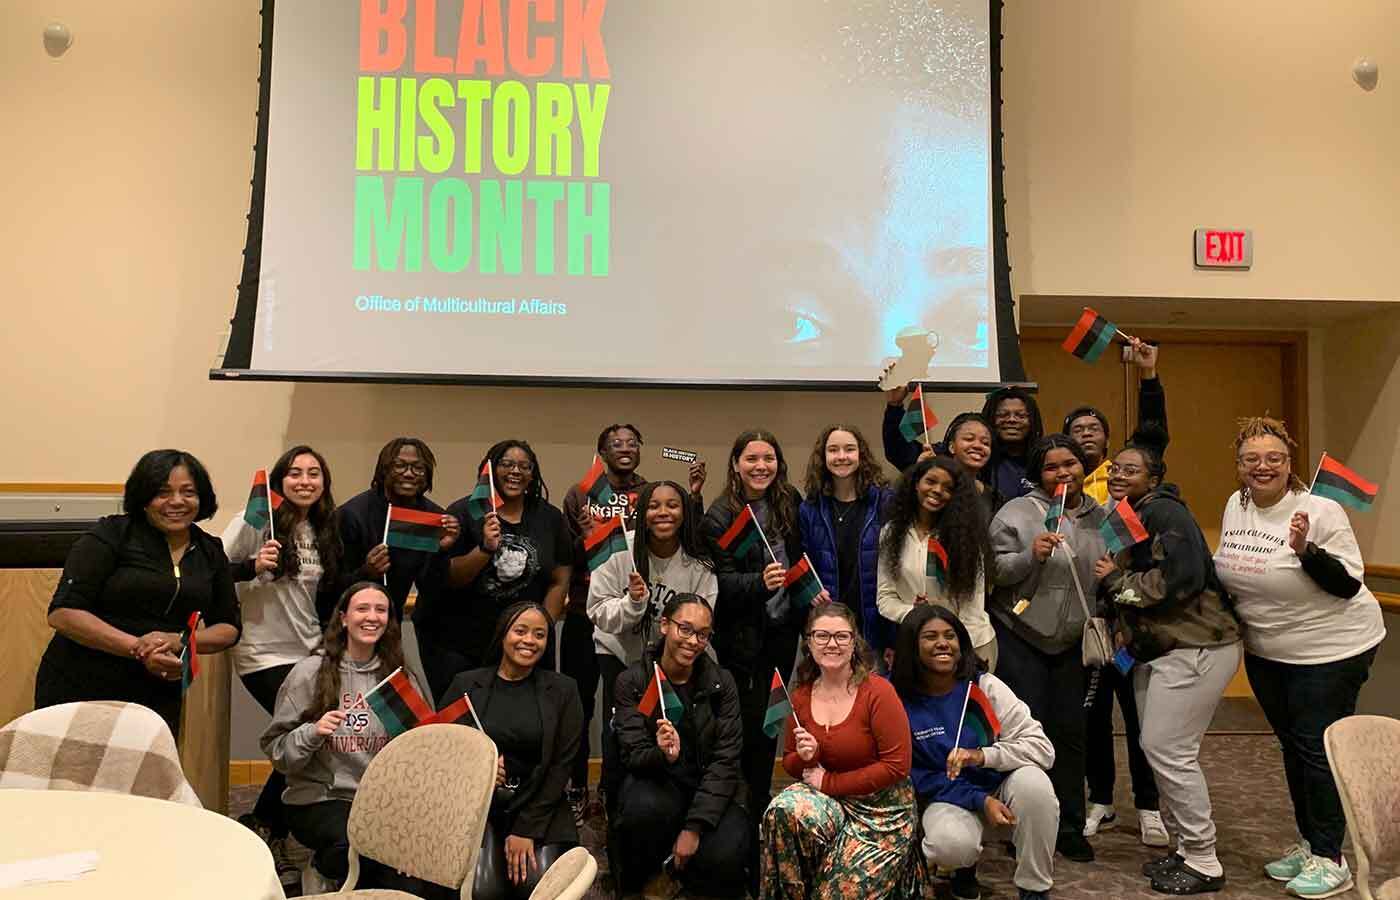 Students posing at Black History Month event